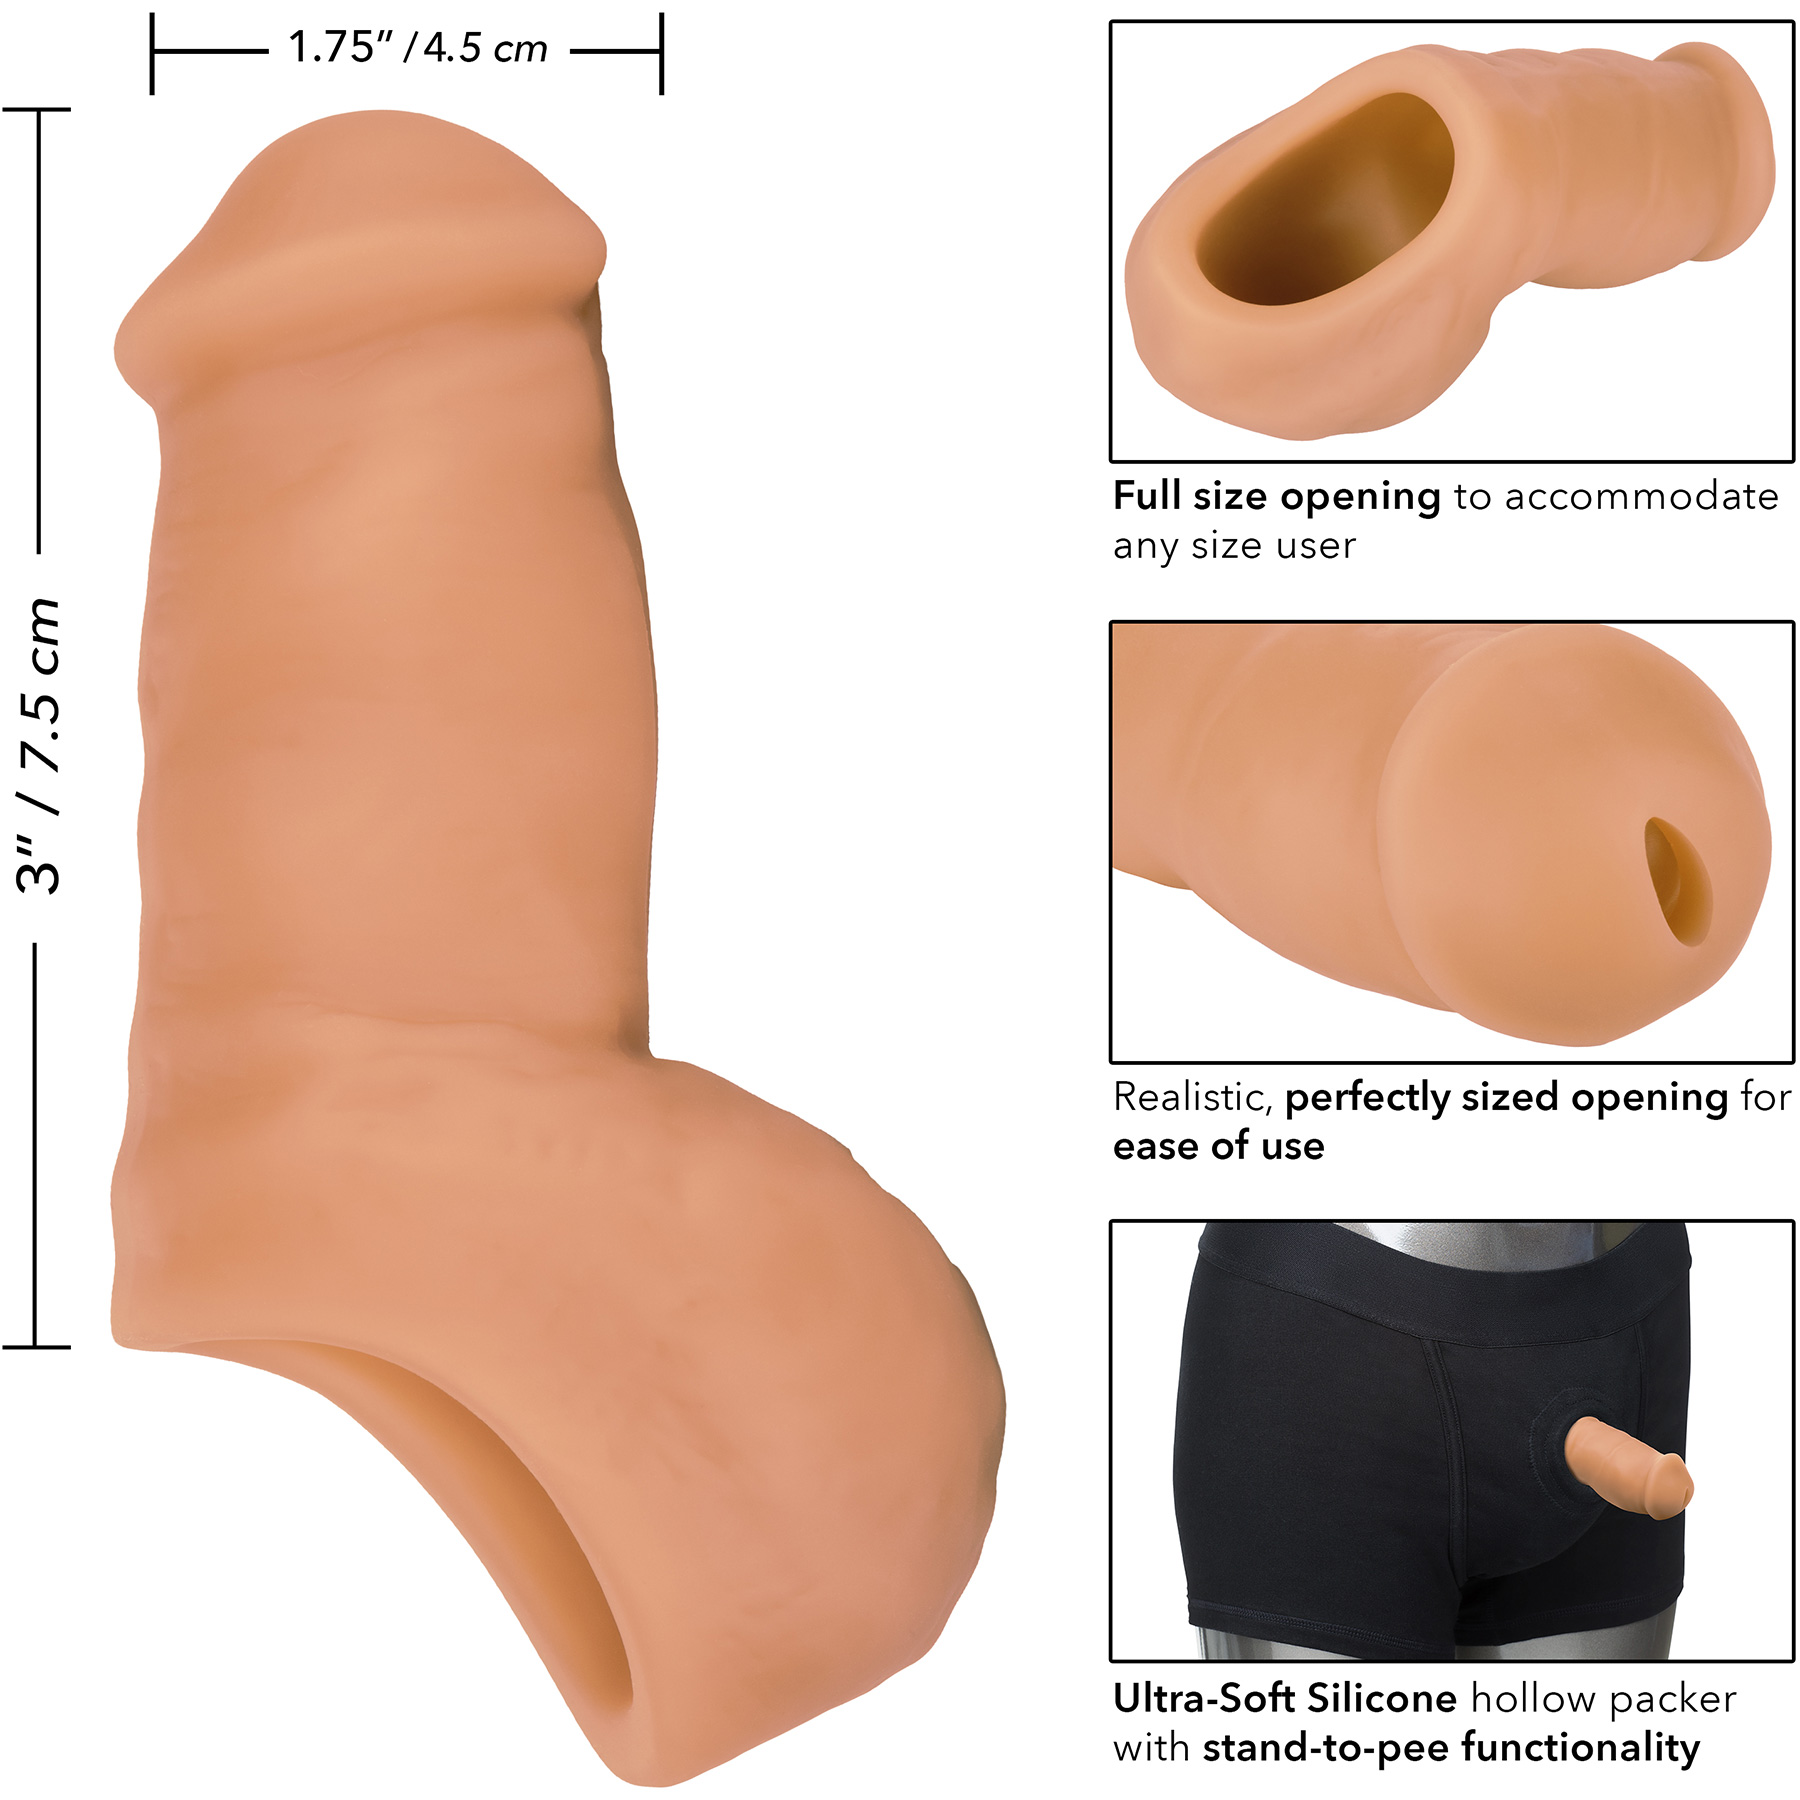 Packer Gear Ultra-Soft Silicone STP Packer - Measurements